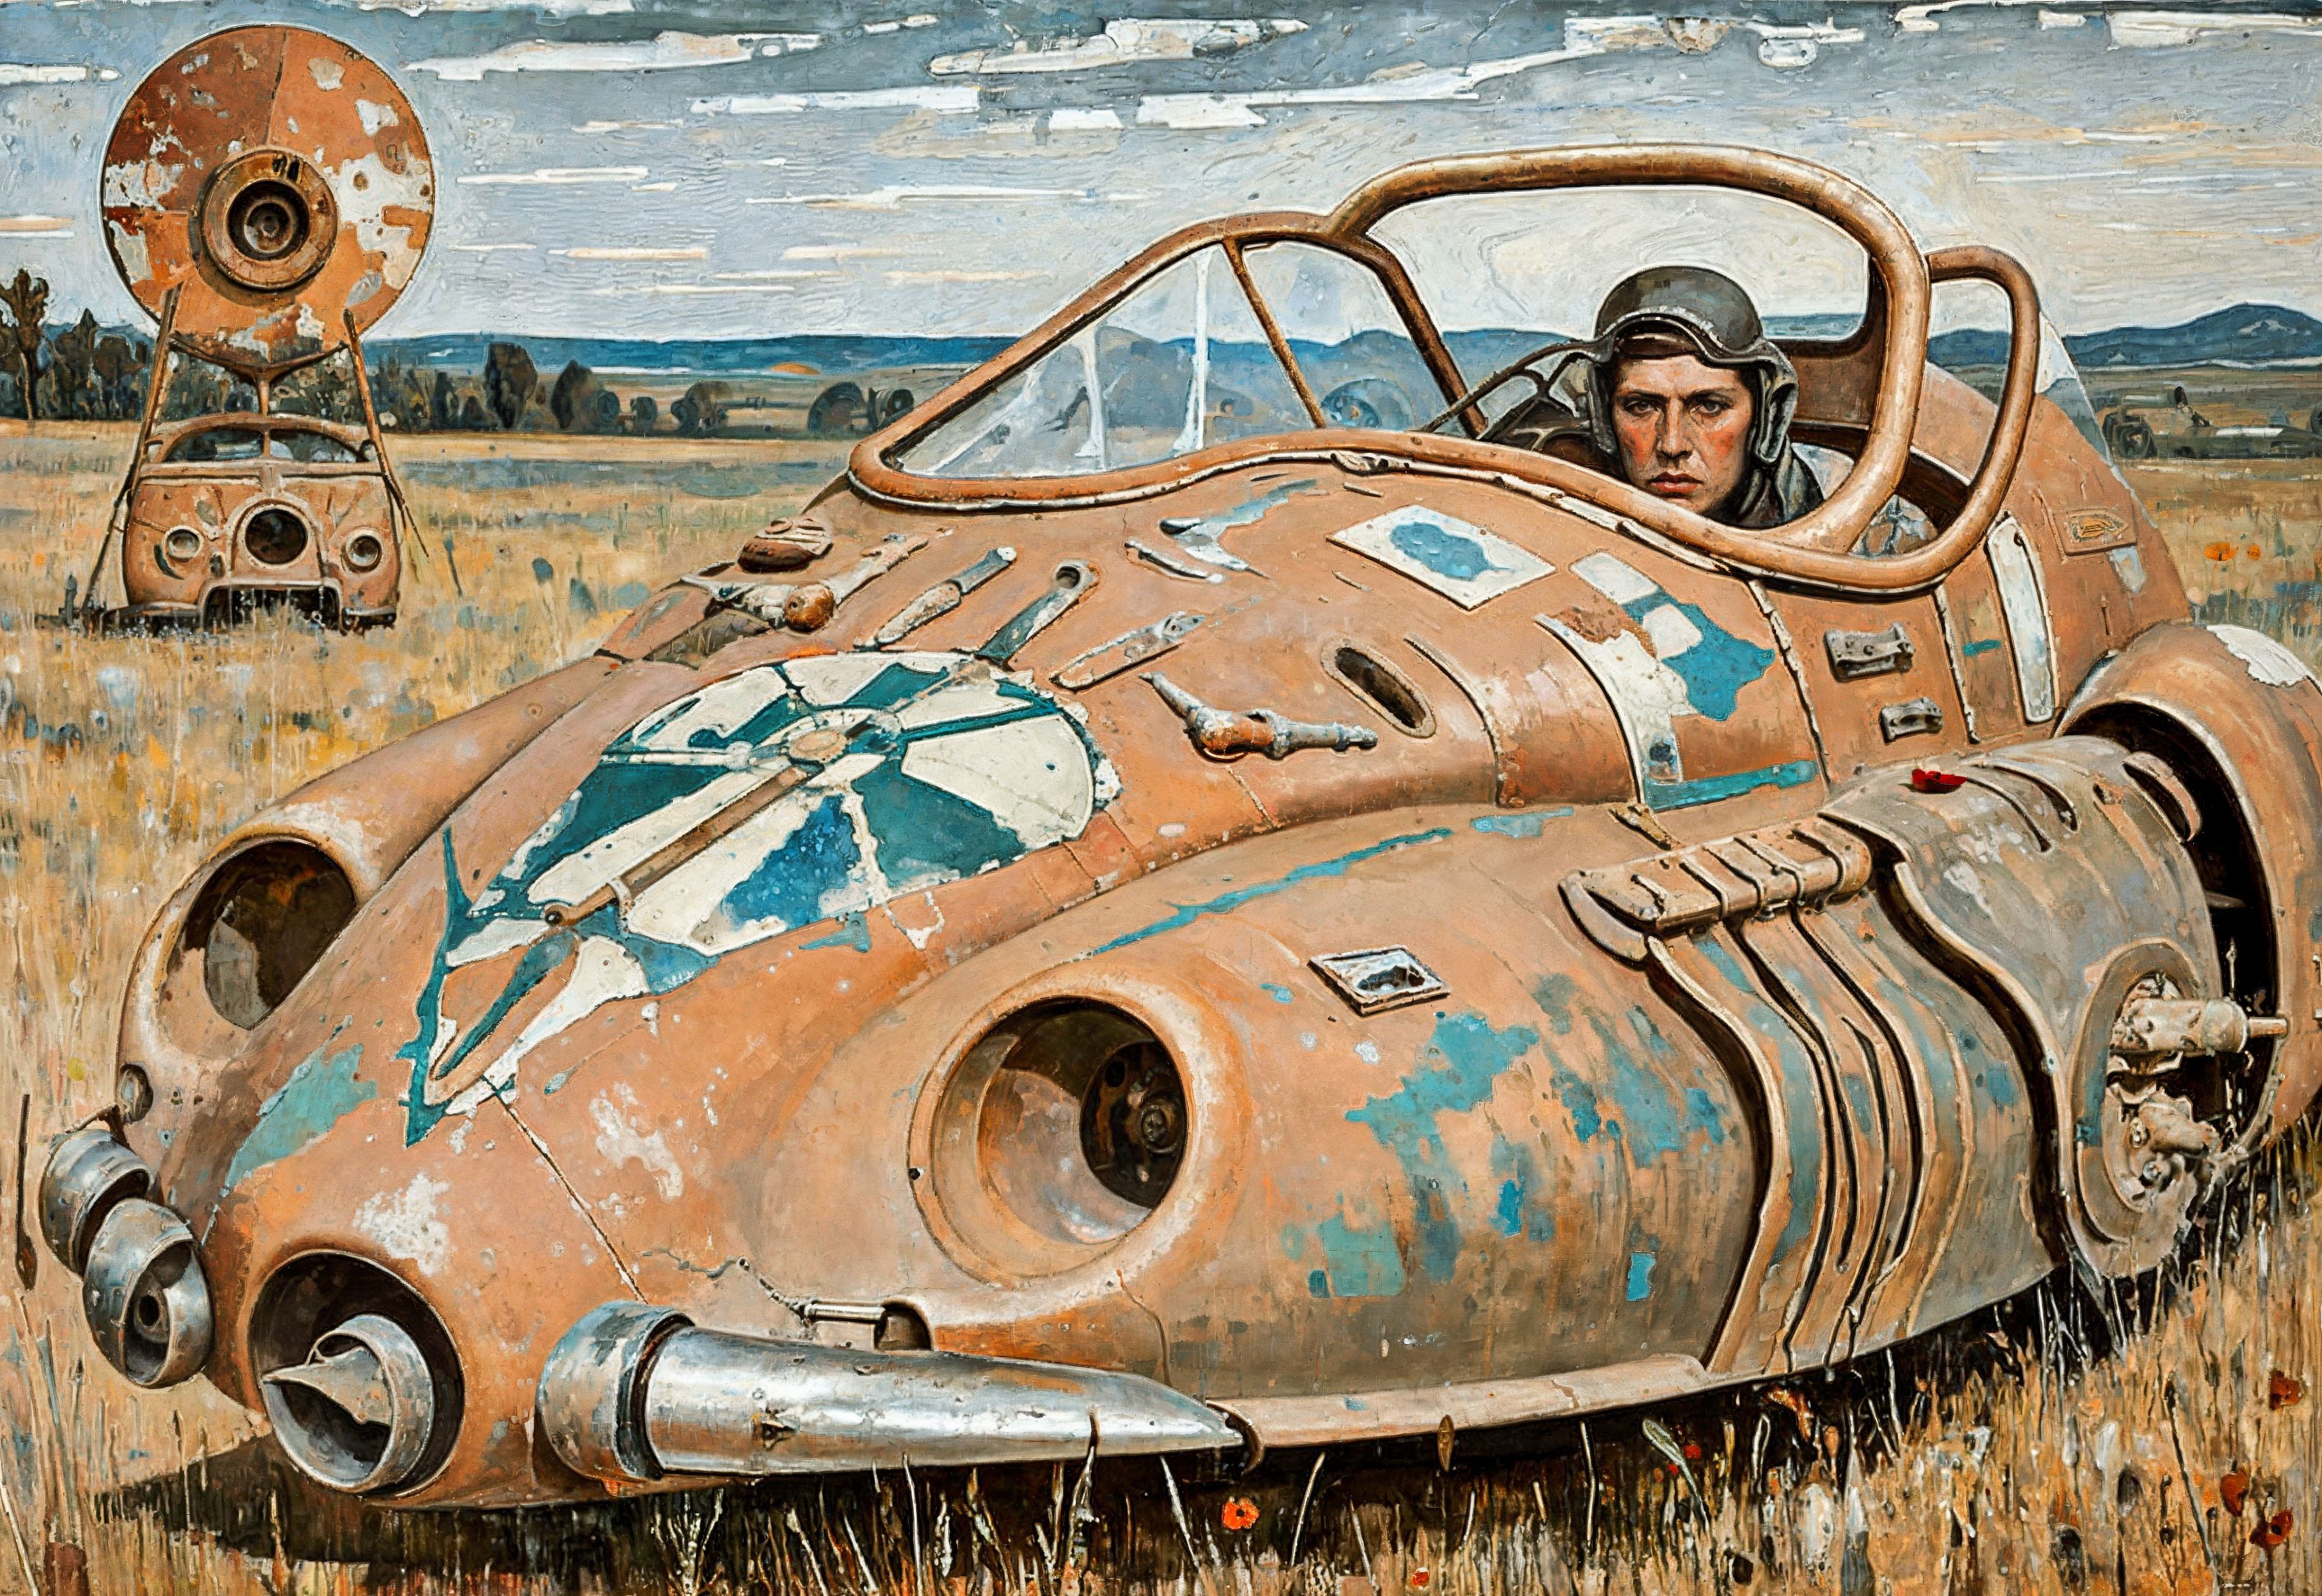 A Painting of a Man in a Futuristic Vehicle